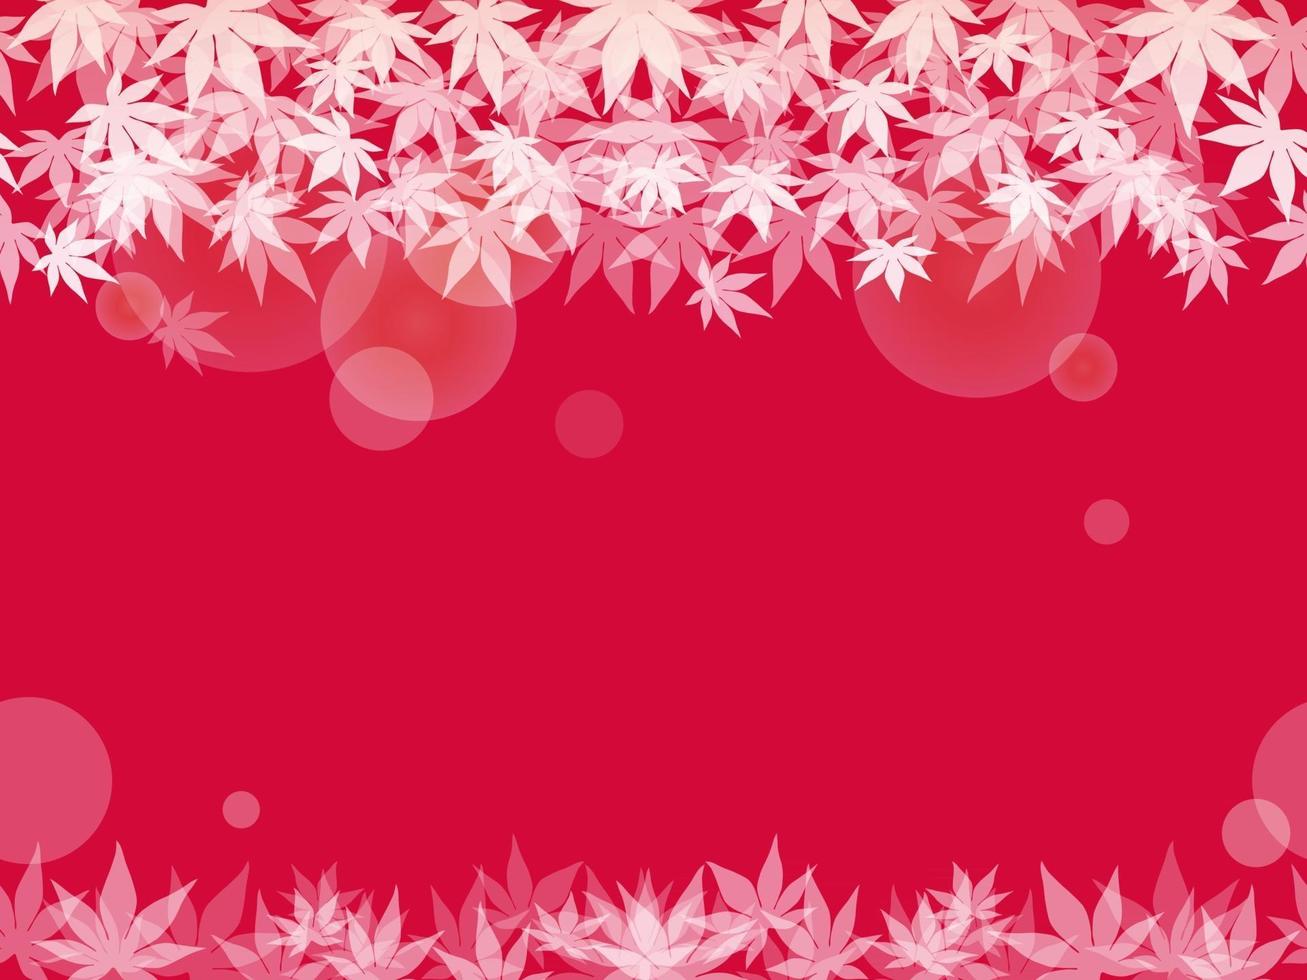 Seamless Maple Leaf Frame On A Red Background. Horizontally repeatable. Vector illustration.